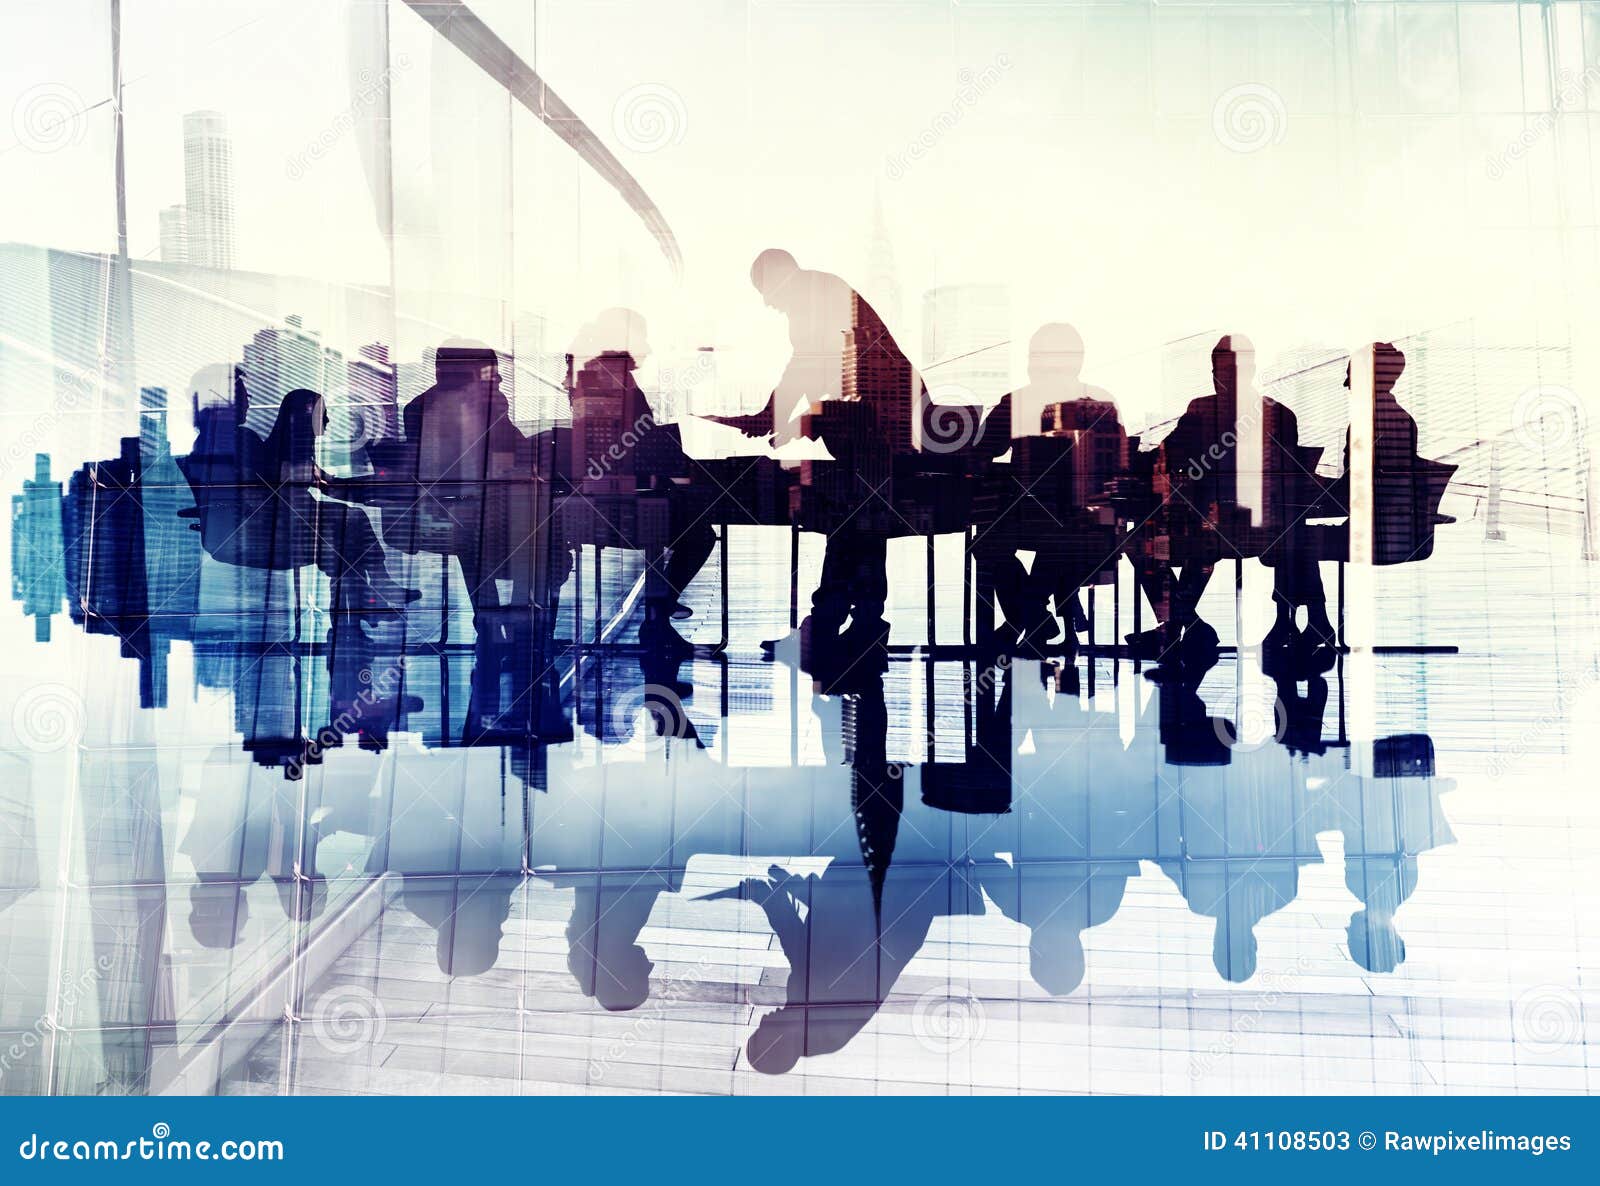 abstract image of business people silhouettes in a meeting